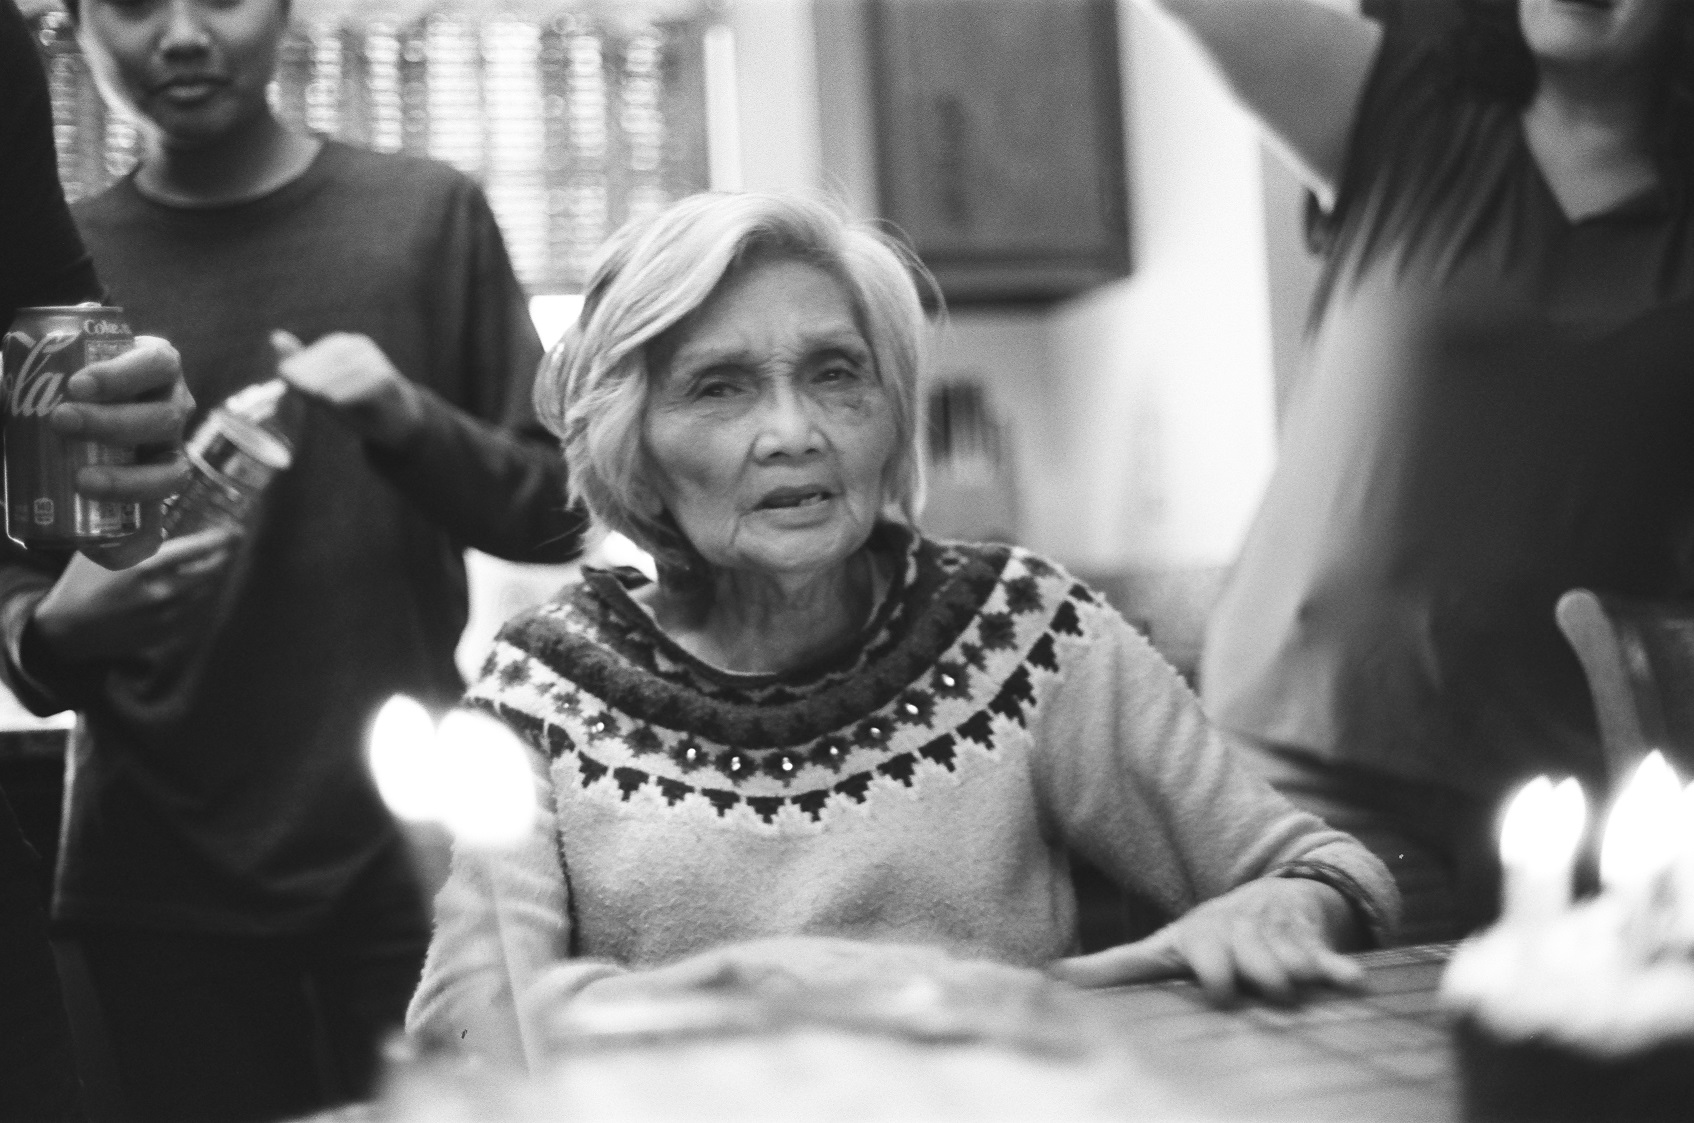 PICTURED: A black and white portrait of the photographer's grandmother. She sits while other people stand beside and behind her, partially out of frame. Cakes with candles are blurry in the foreground.